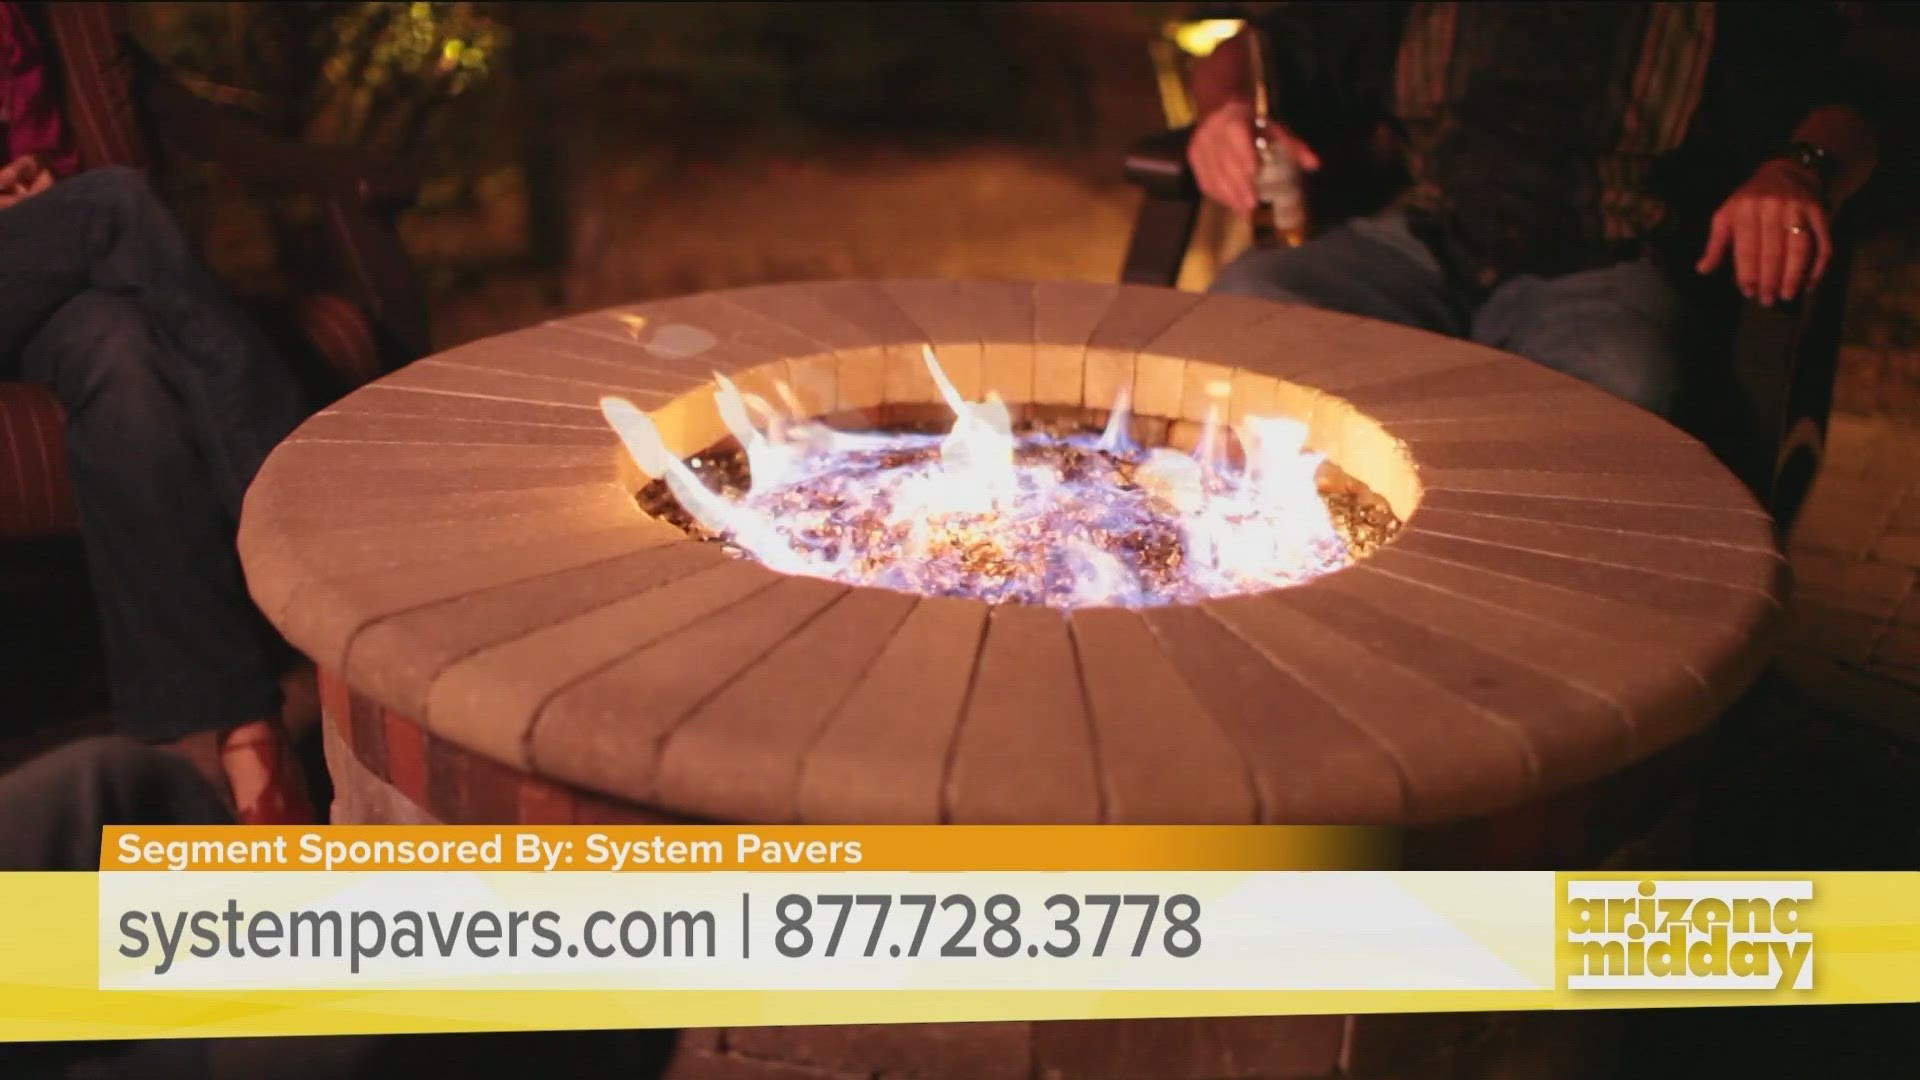 Joe Wade with System Pavers shows us how they can get the outdoor space of your home ready to enjoy during the cooler fall temperatures.